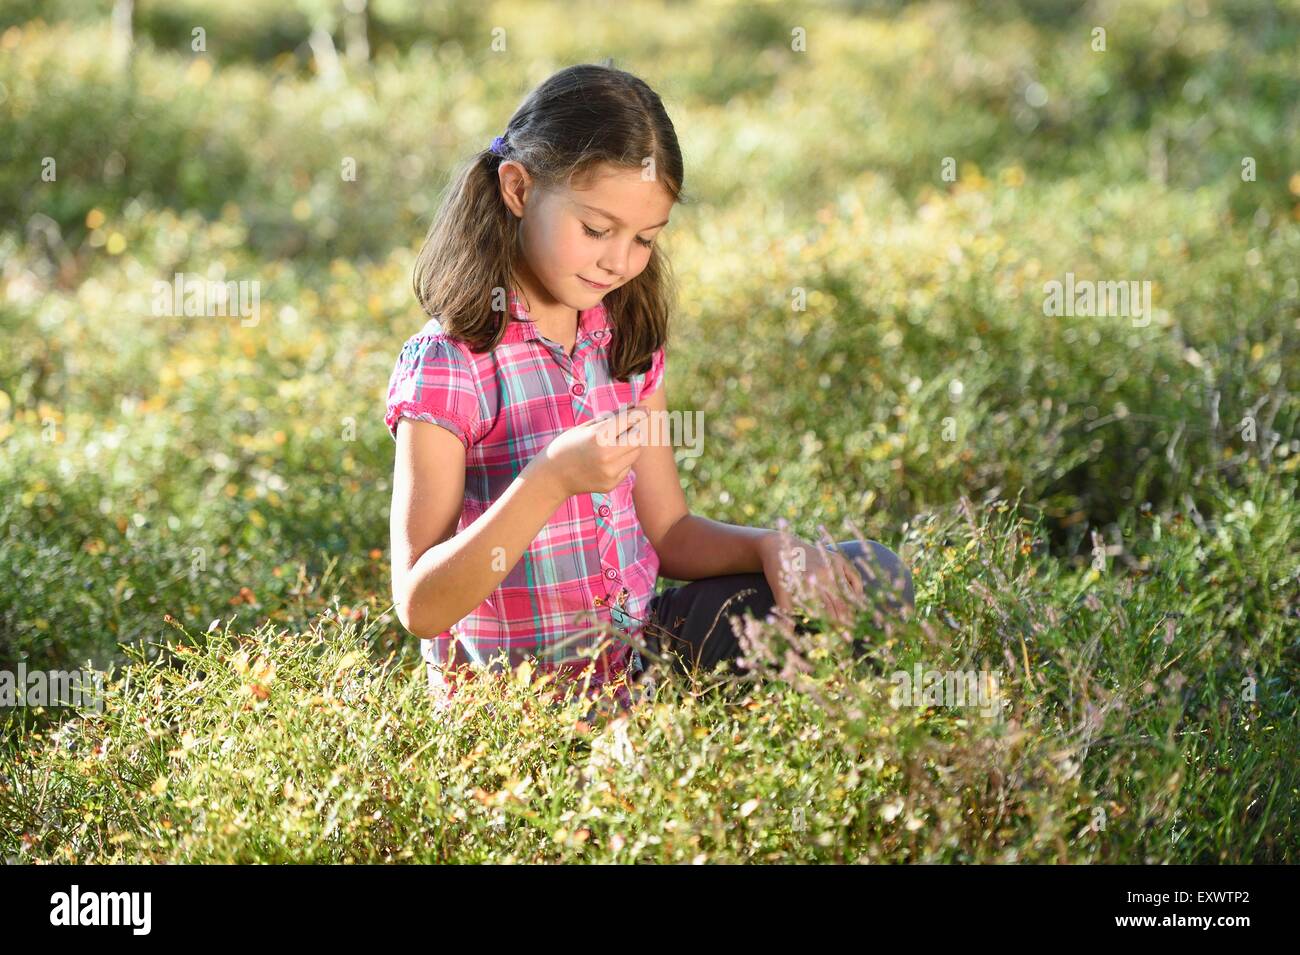 Girl eating berries in a pine forest Stock Photo